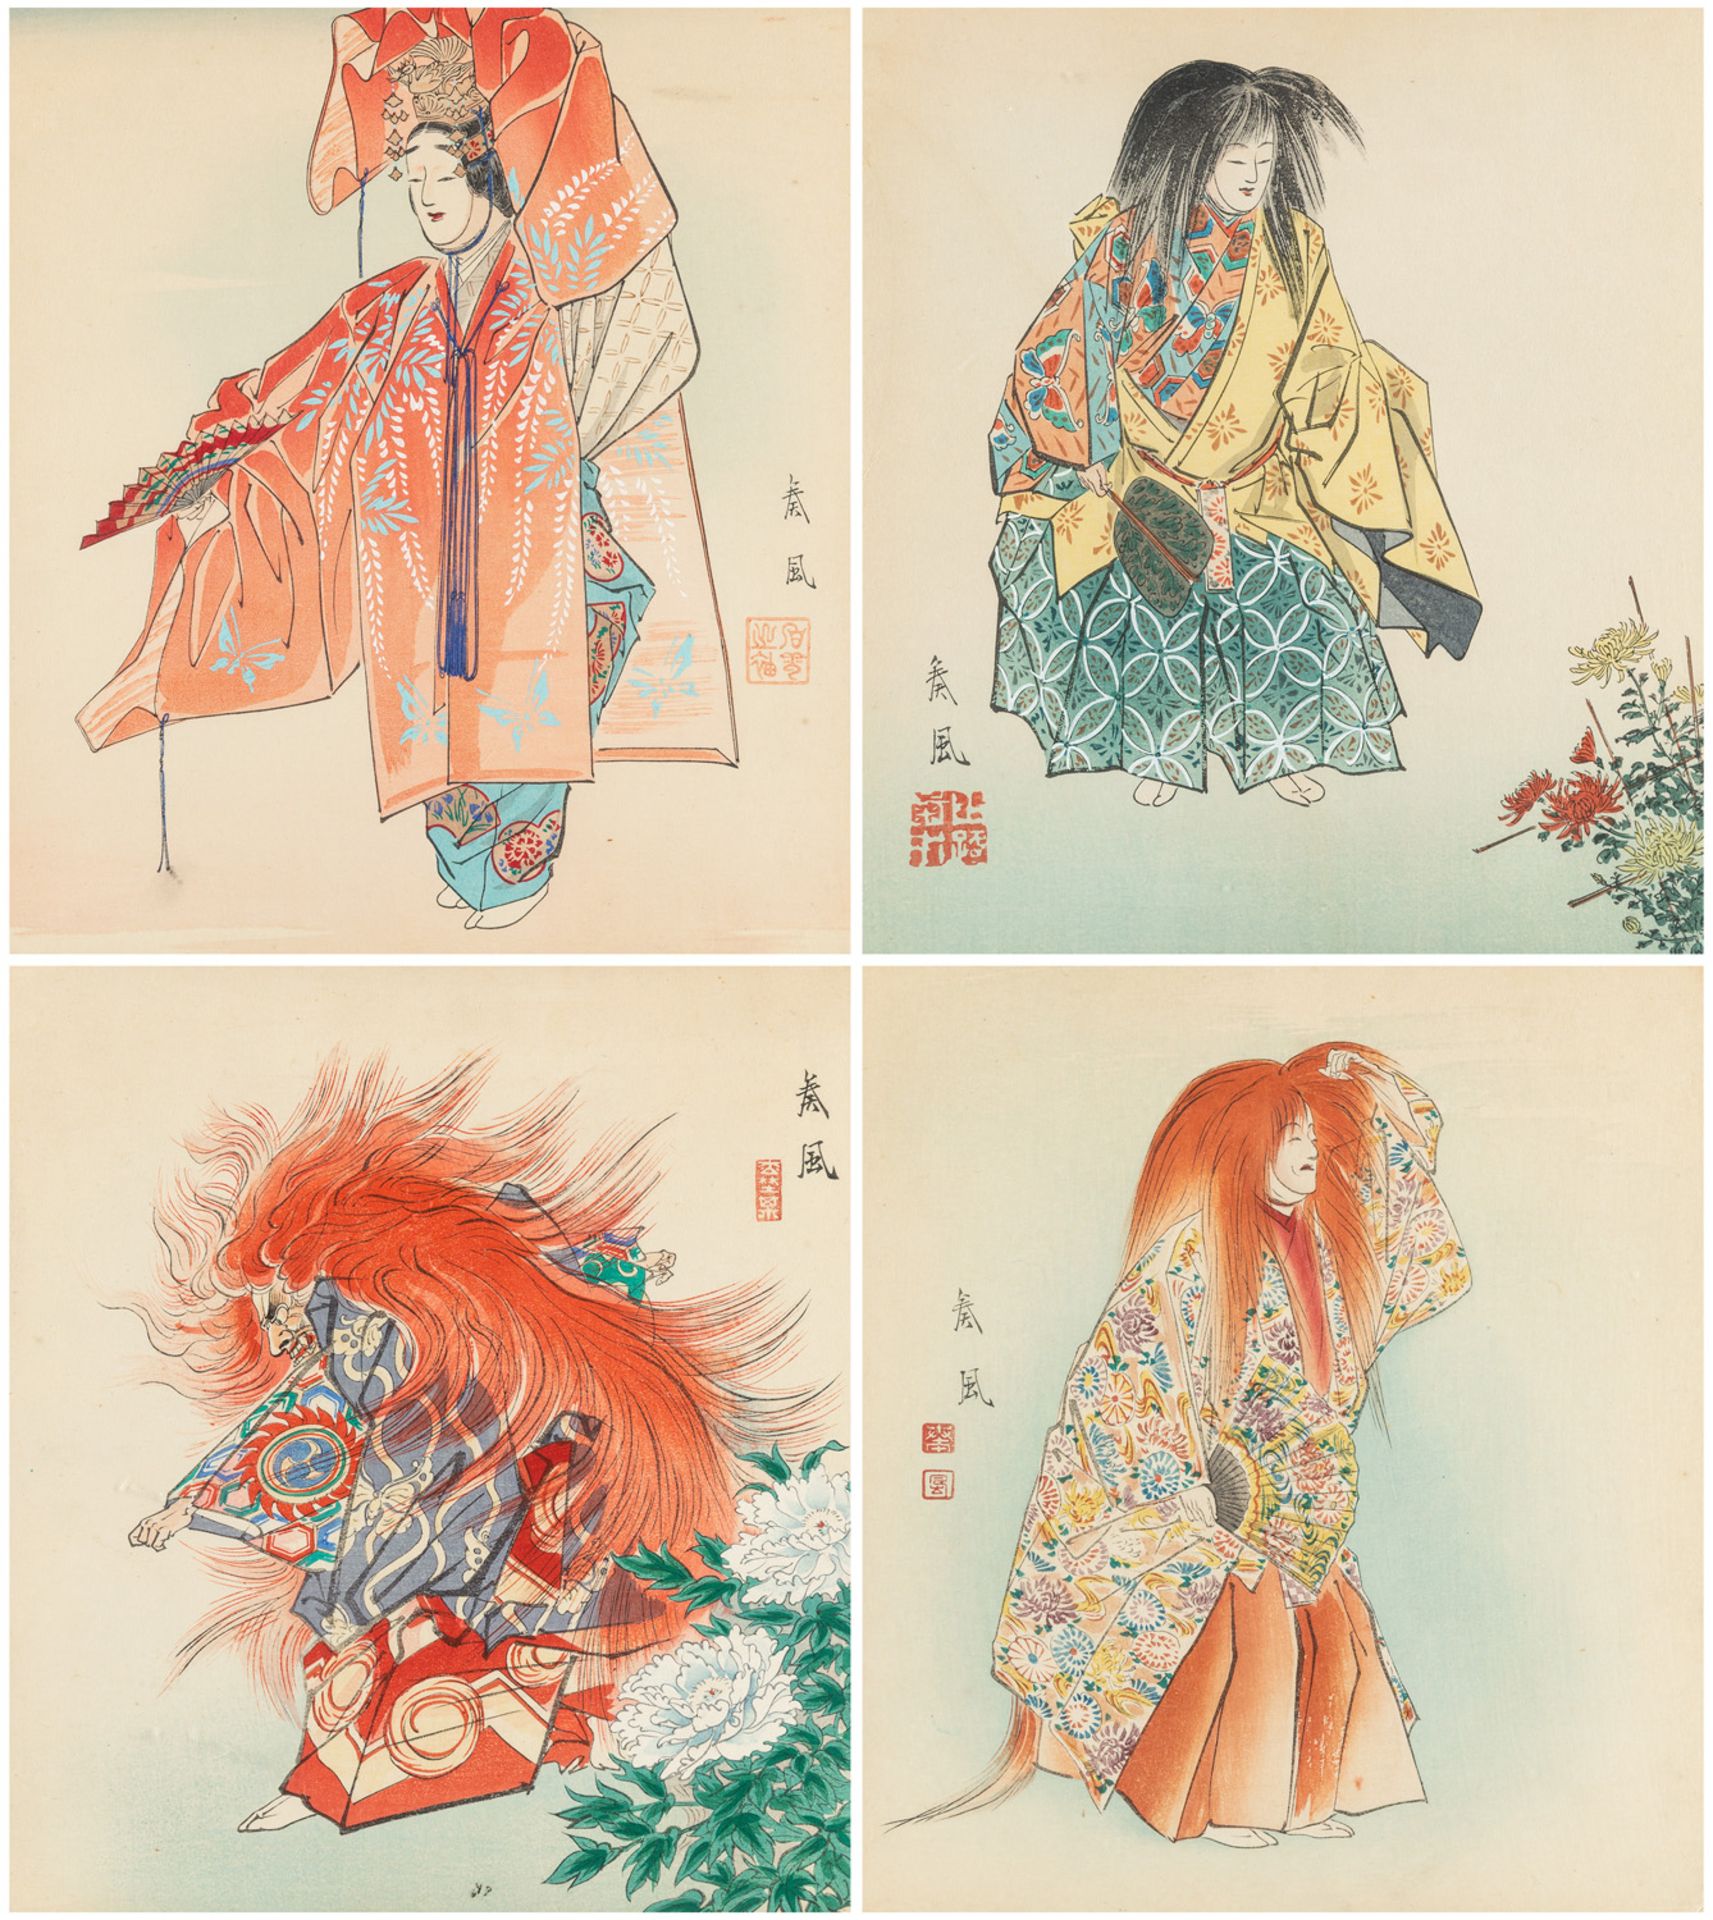 A GROUP OF FOUR WOODBLOCK PRINTS BY MATSUNO SOFU (1899-1963) FROM NOH TWELVE MONTHS SERIES, 1956